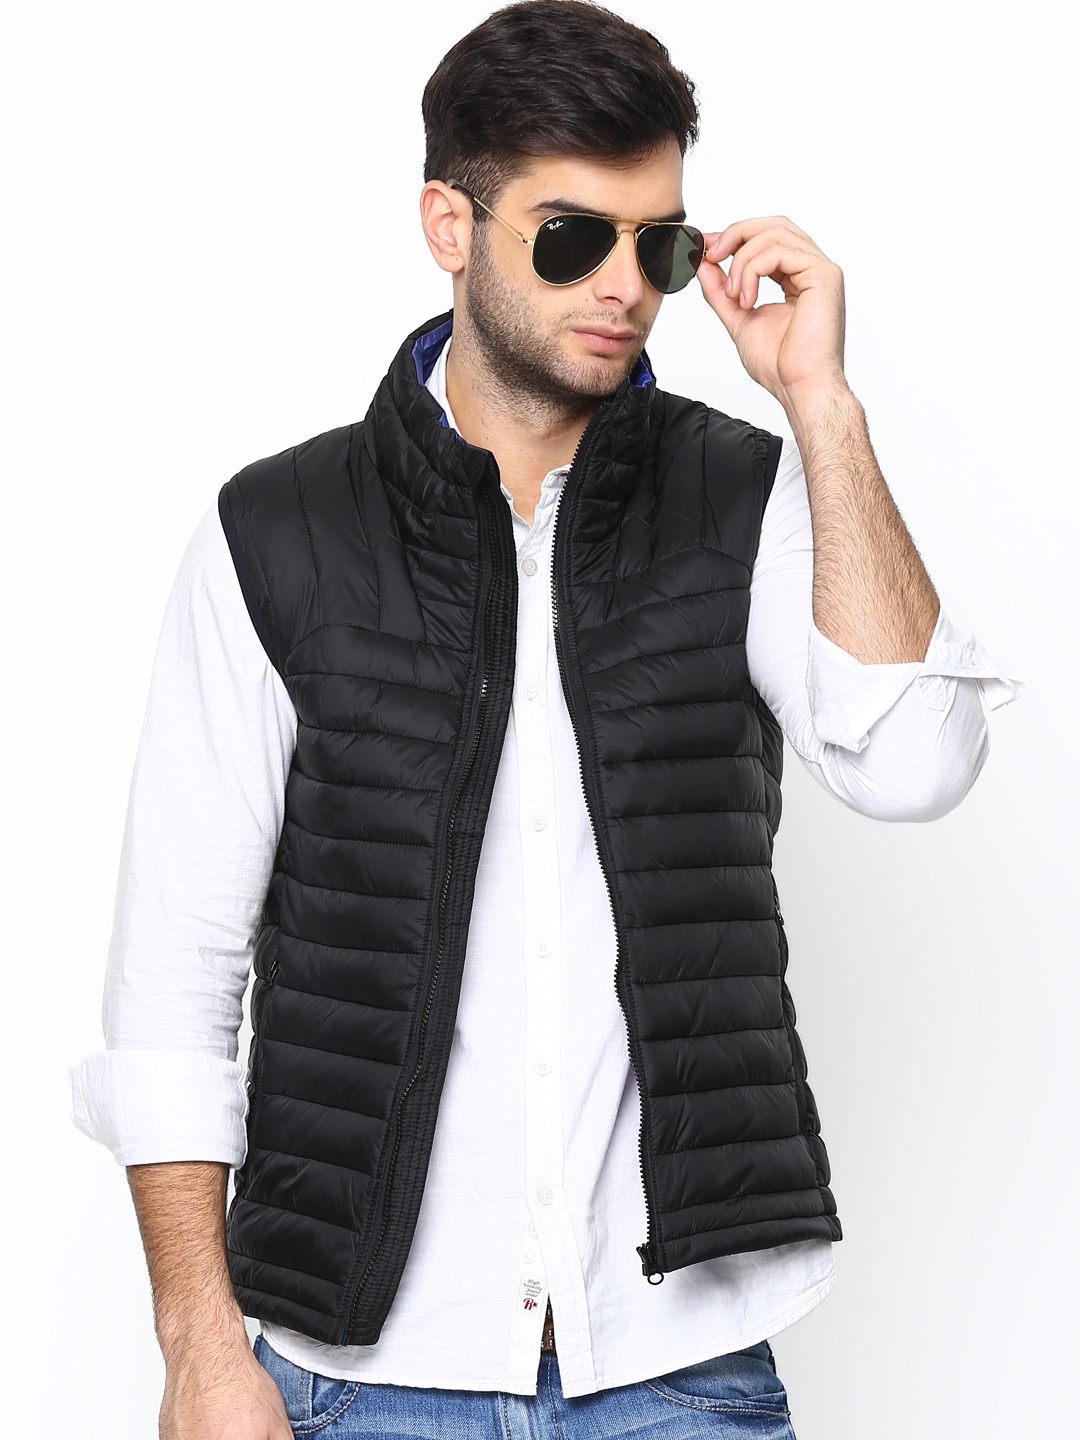 https://assets.myntassets.com/h_1440,q_100,w_1080/v1/images/style/properties/United-Colors-of-Benetton-Men-Black-Sleeveless-Jacket_6b58e9a1e2aaa2329be99caecd2ddfa5_images.jpg